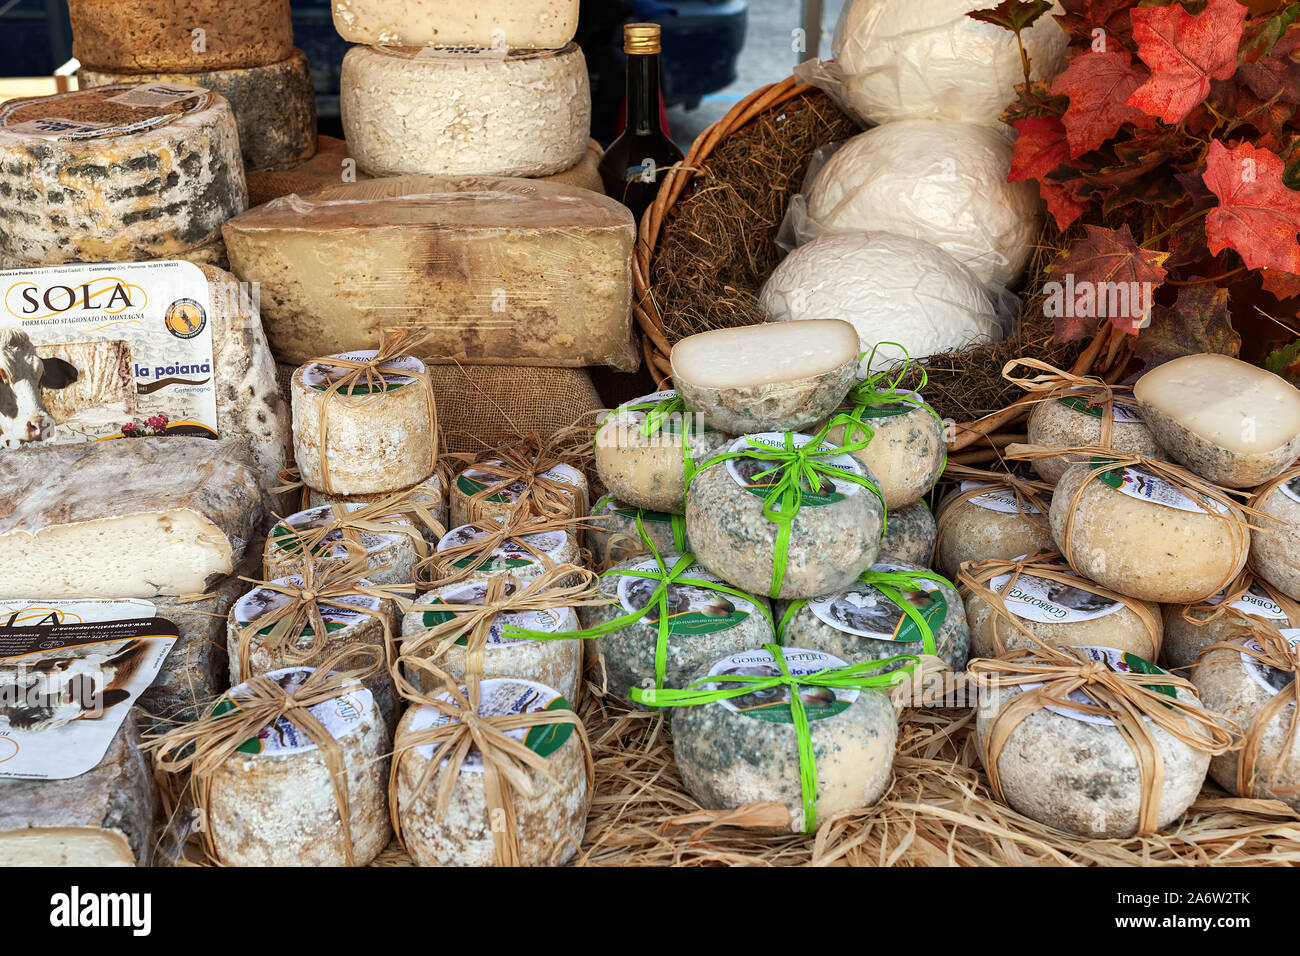 Small hard artisan cheese wrapped in straw at the farmers market. Stock Photo